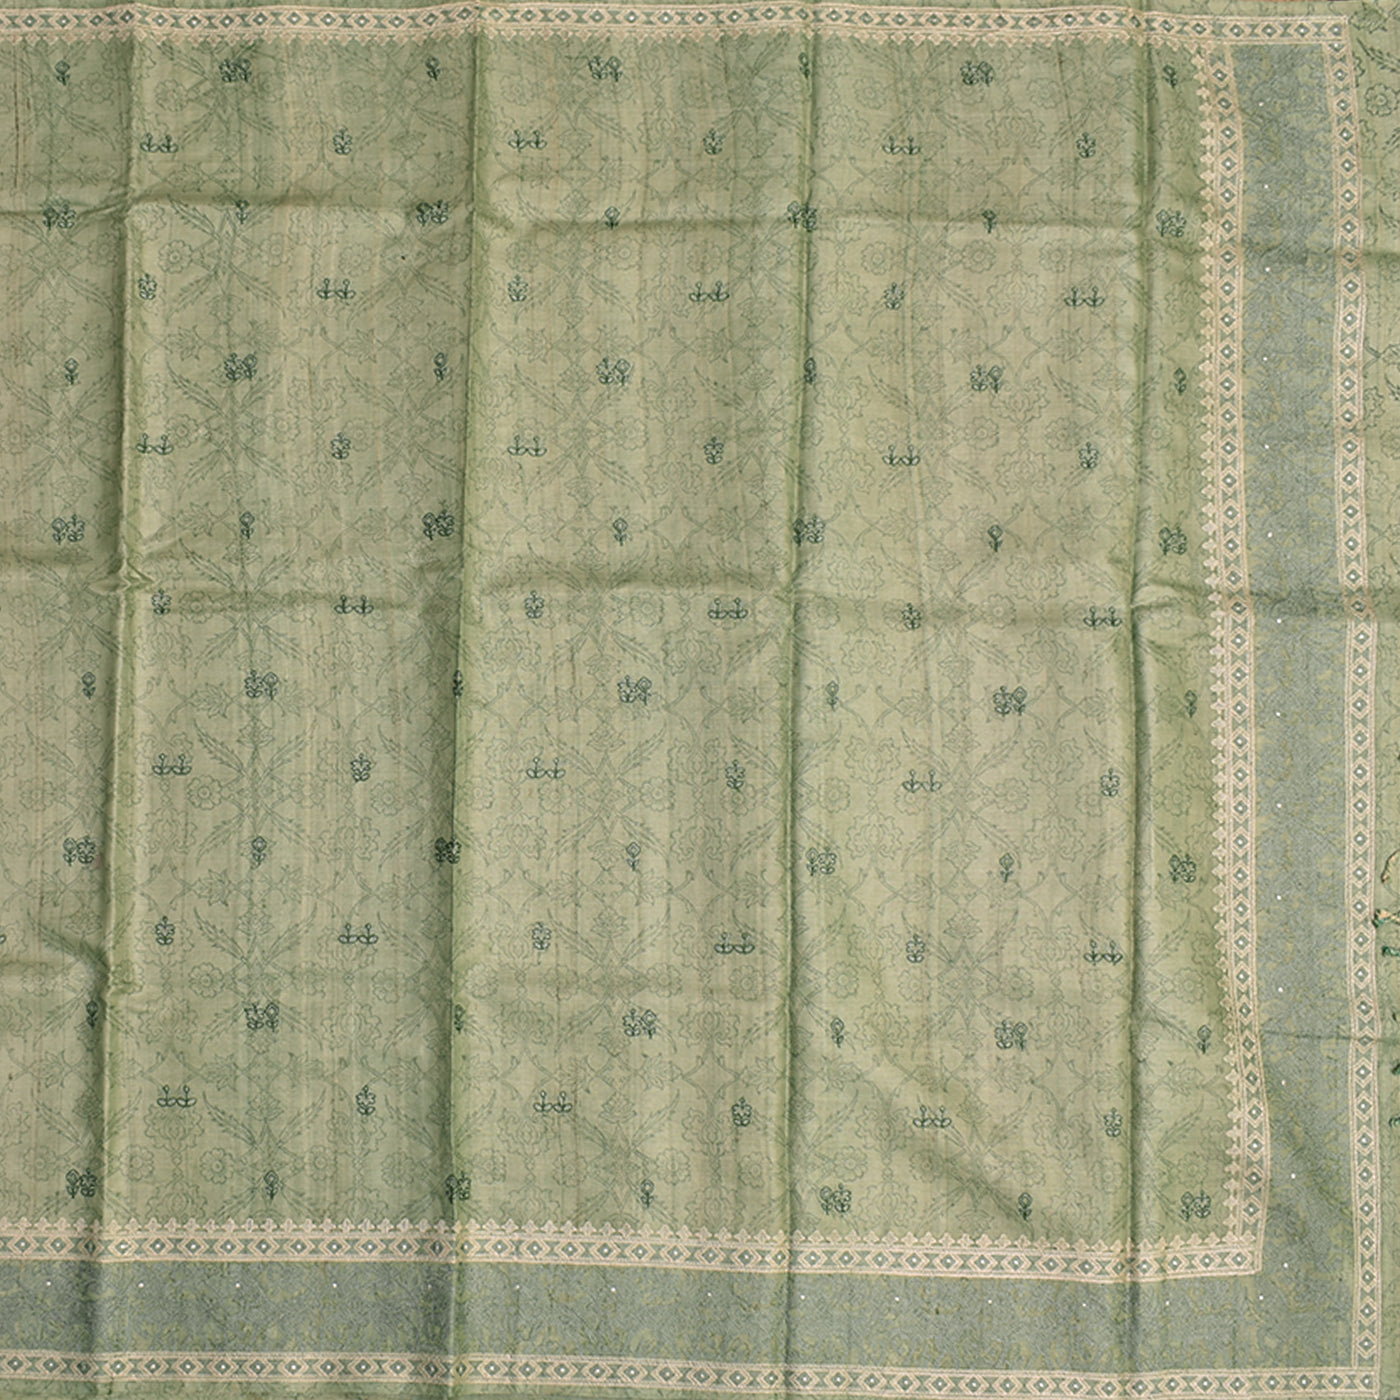 Apple Green Tussar Silk Saree with Floral Embroidery Design